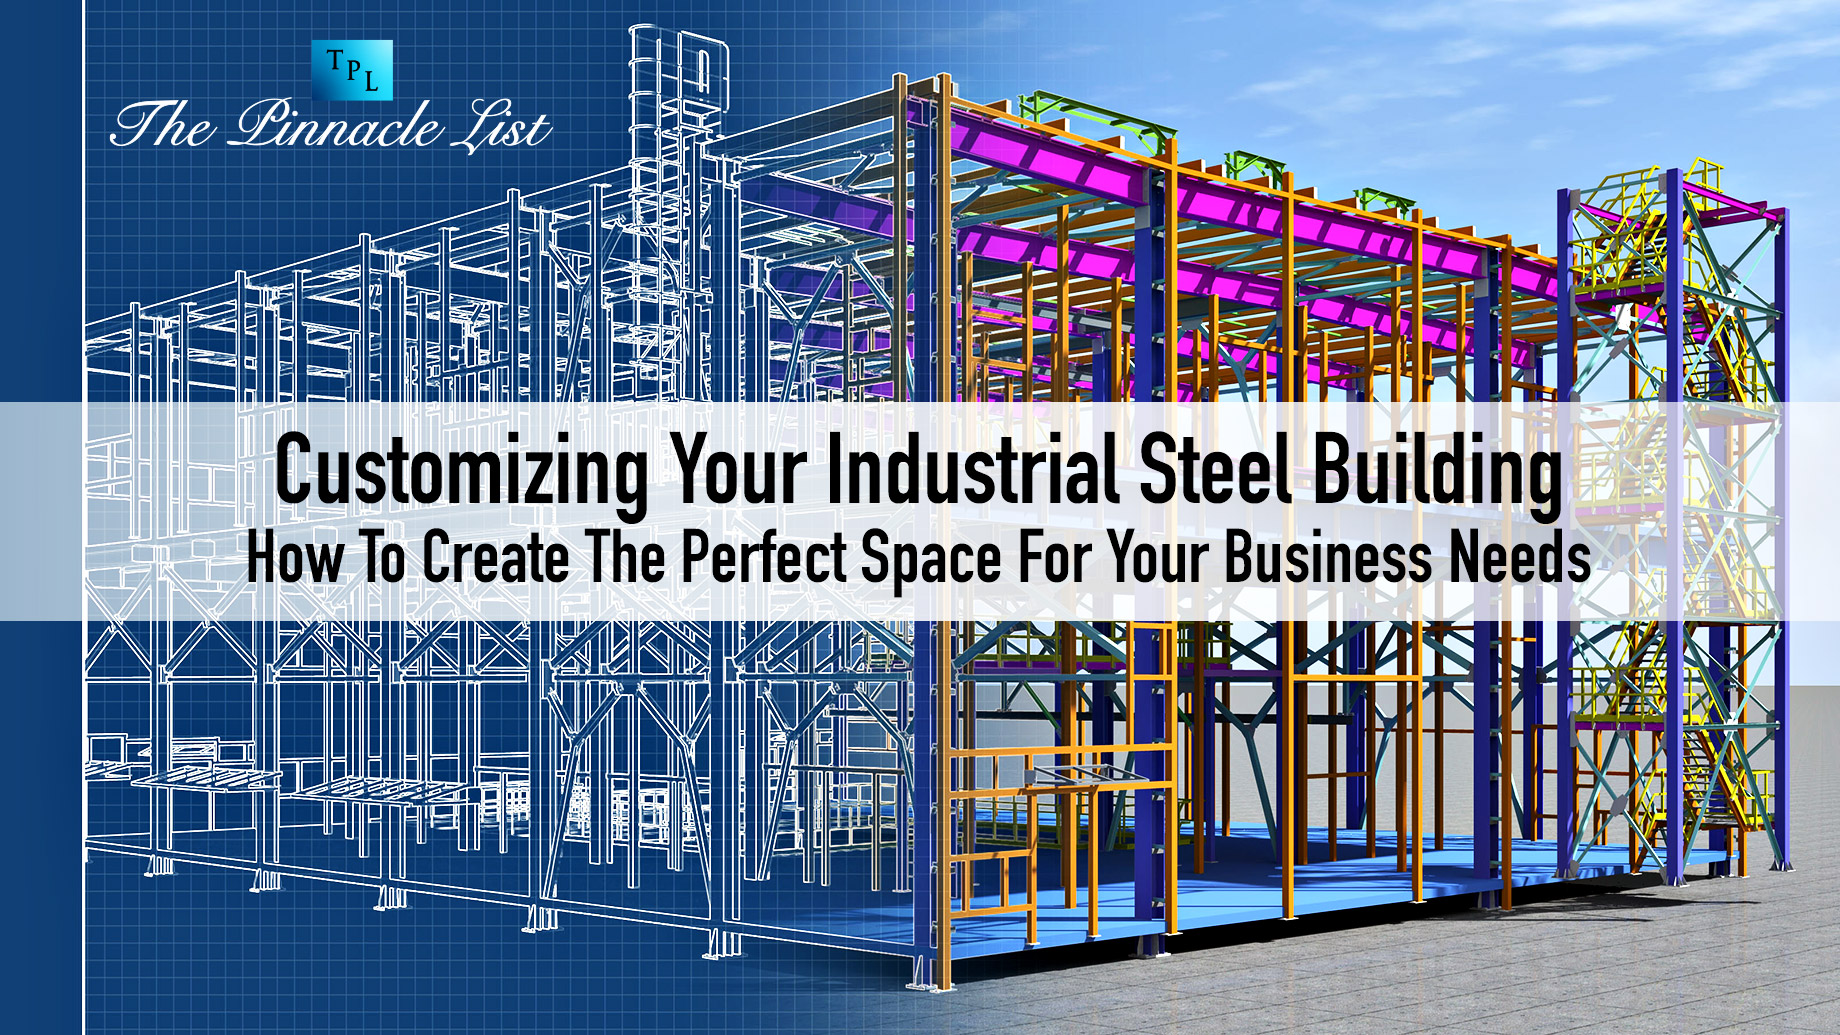 Customizing Your Industrial Steel Building: How To Create The Perfect Space For Your Business Needs